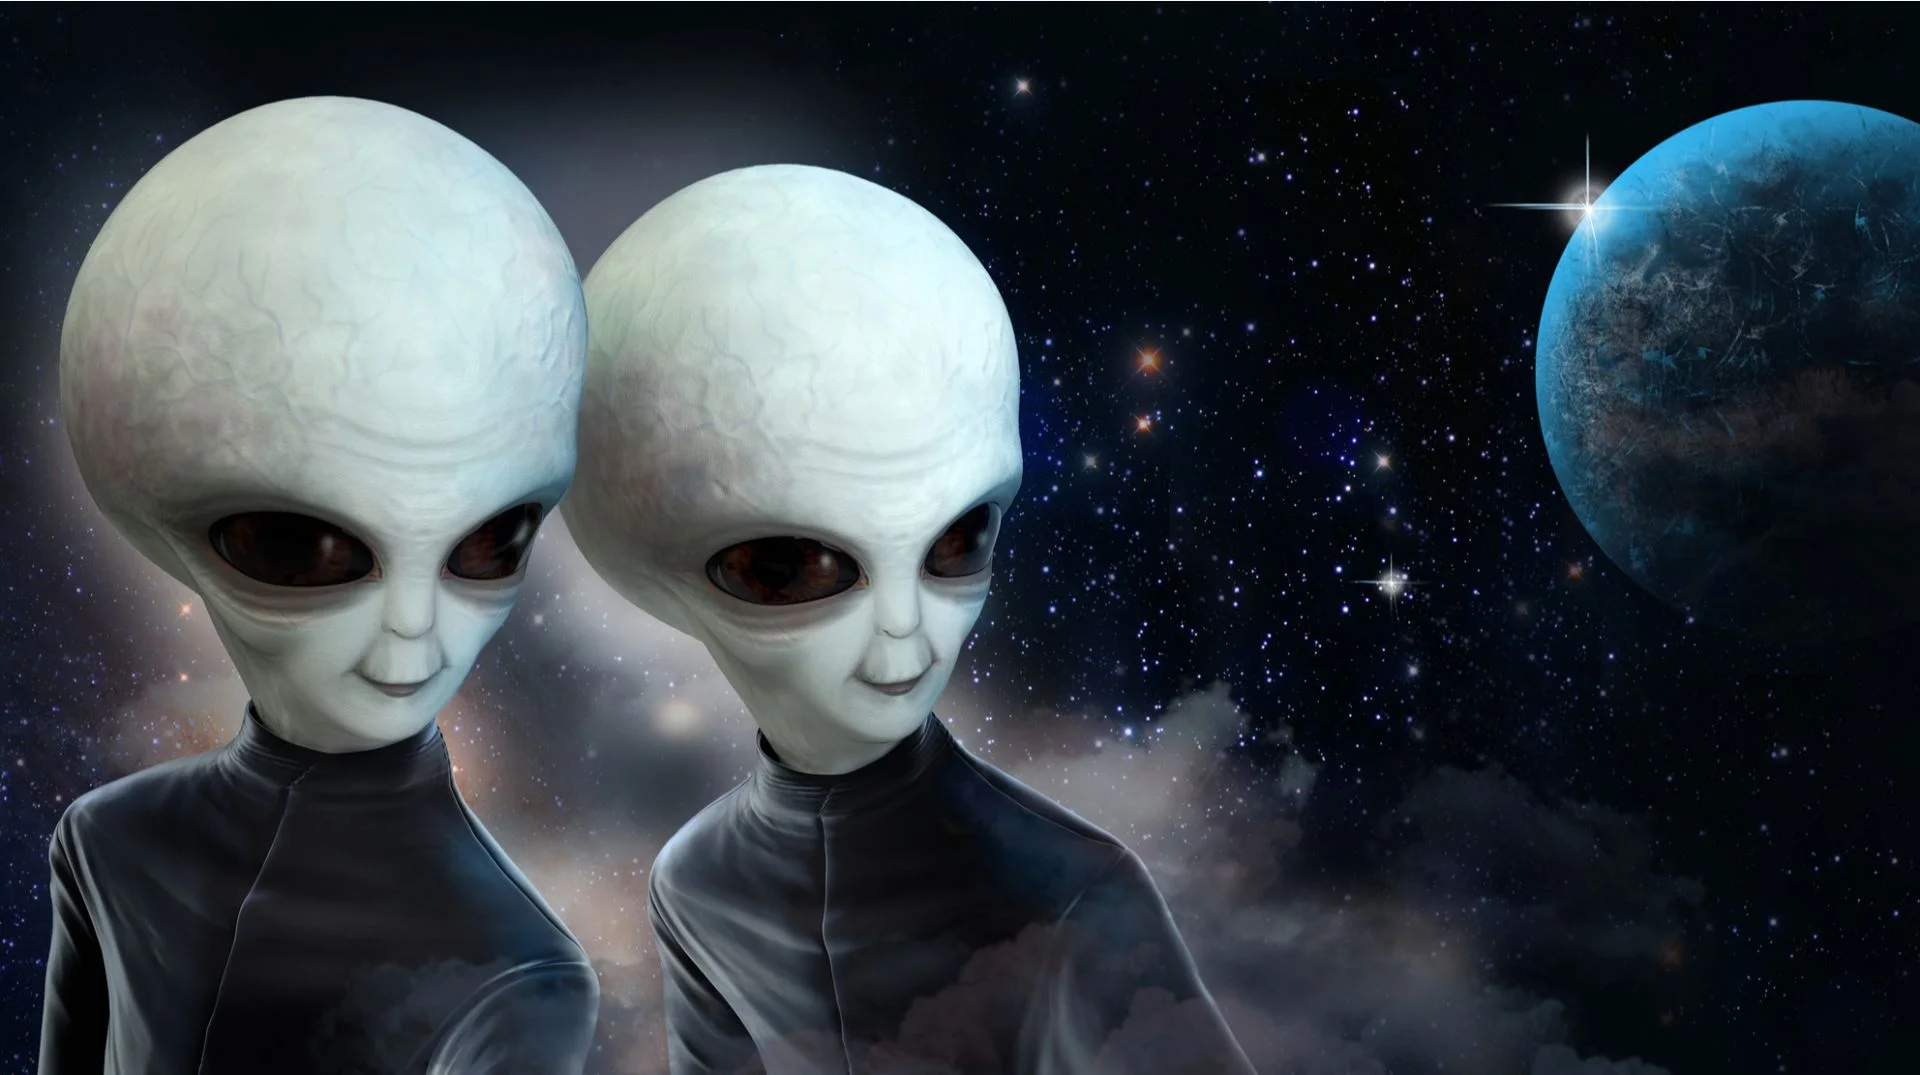 Are we consciously ready for an encounter with aliens?